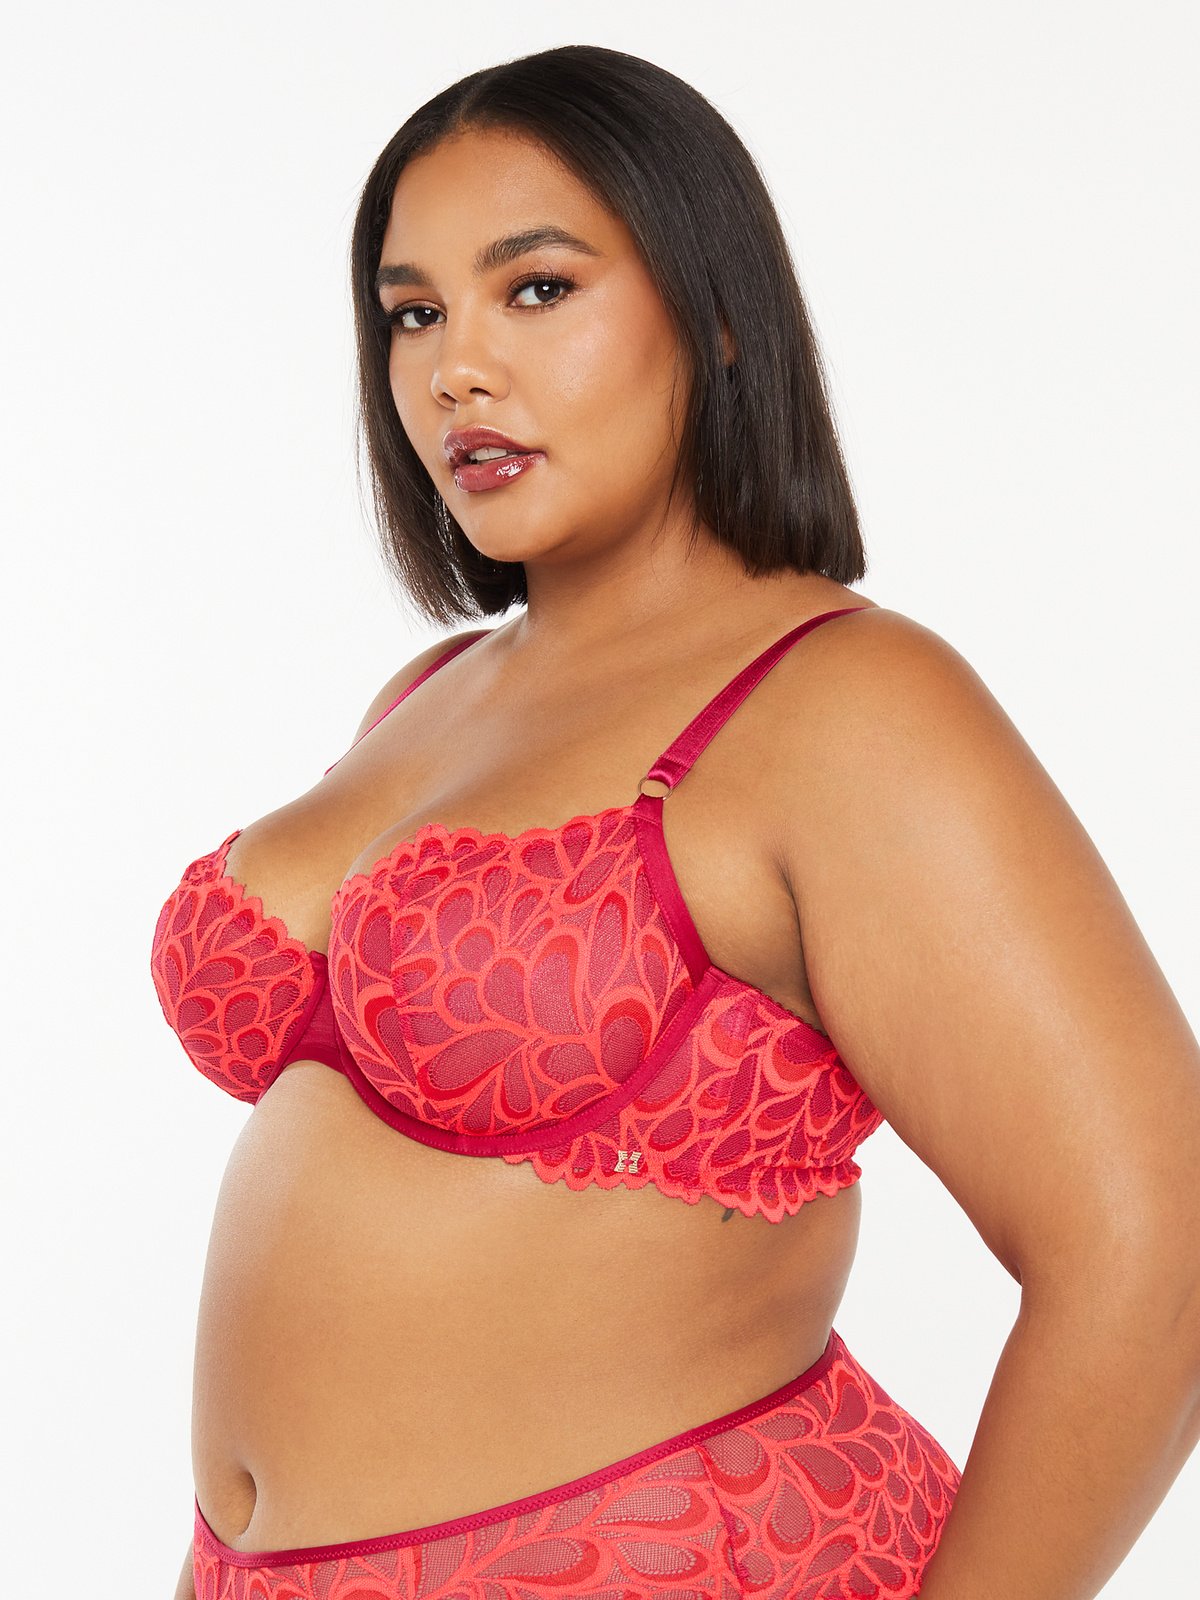 Savage X Fenty Not Sorry Unlined Lace Balconette Bra - NEW Underwire 36DD